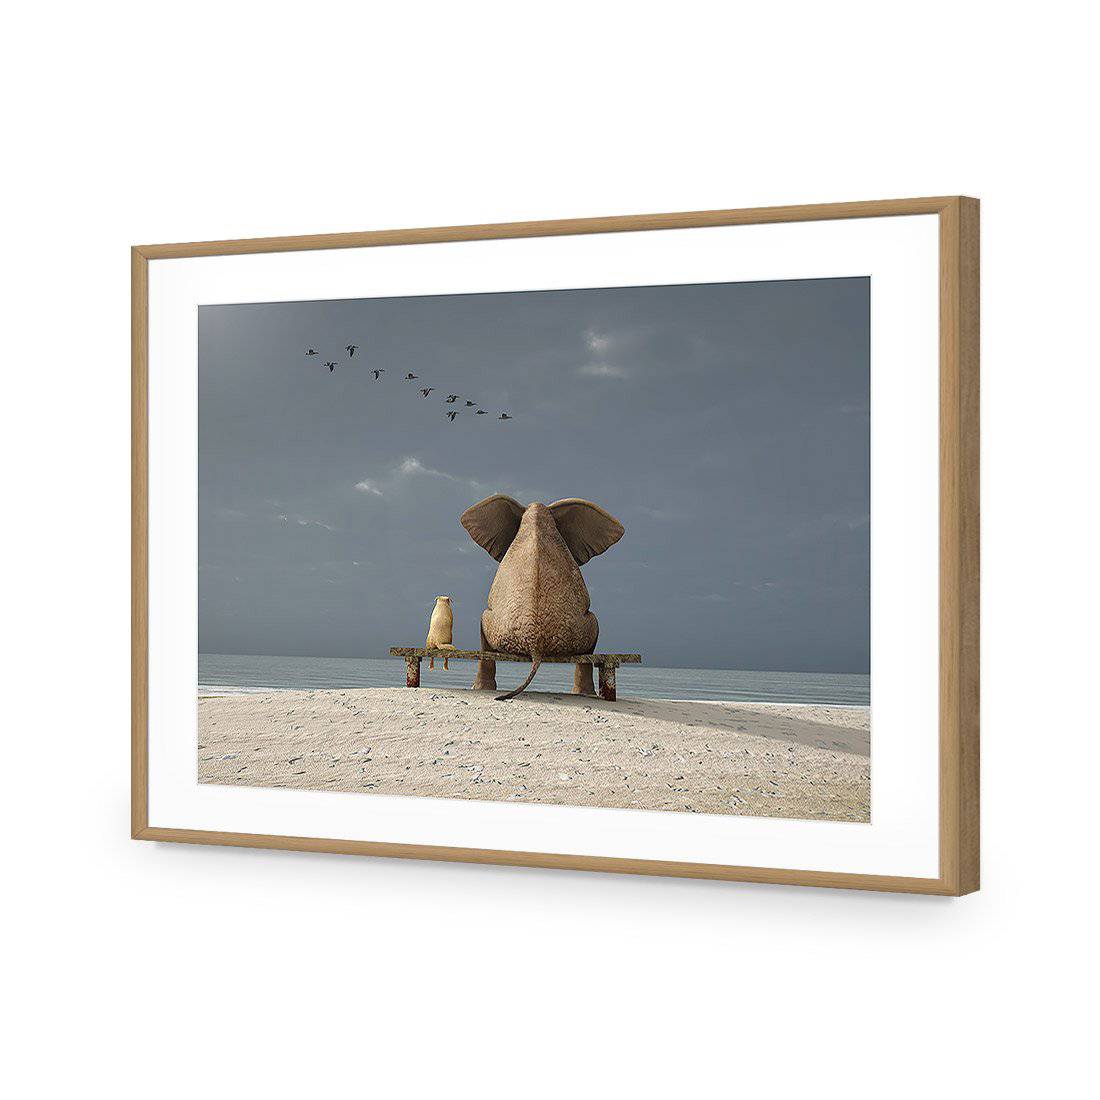 Little And Large-Acrylic-Wall Art Design-With Border-Acrylic - Oak Frame-45x30cm-Wall Art Designs